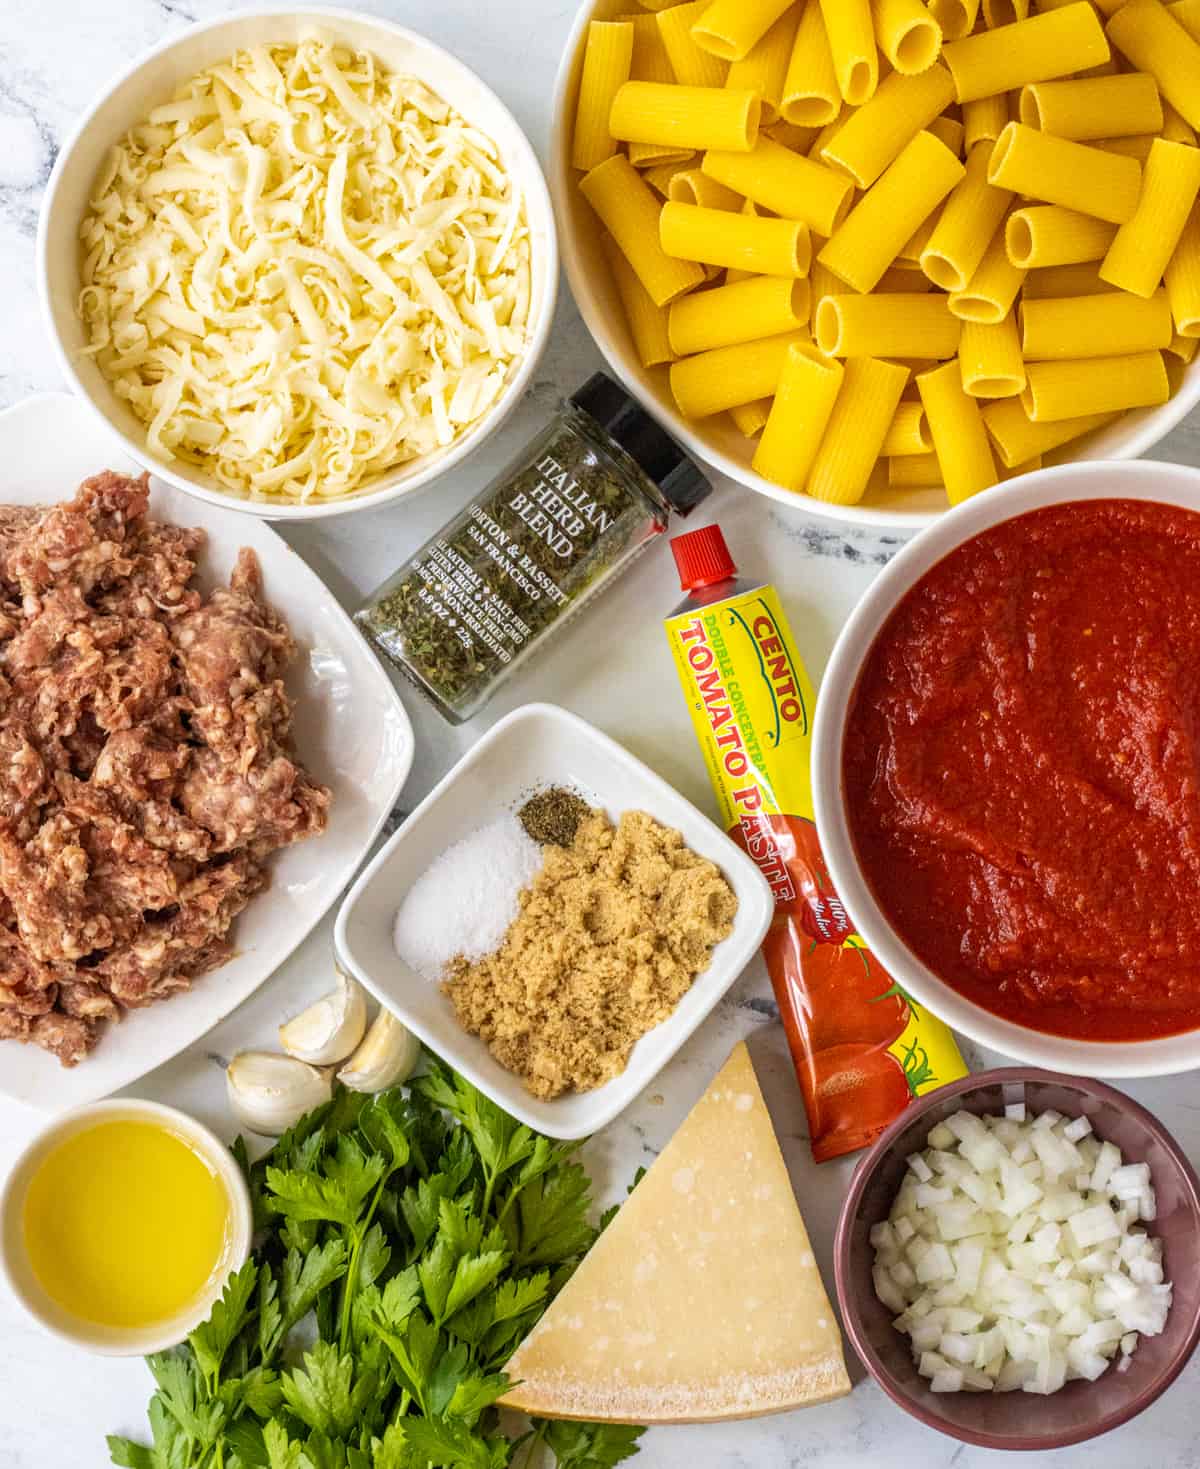 Ingredients for baked rigatoni with sausage.